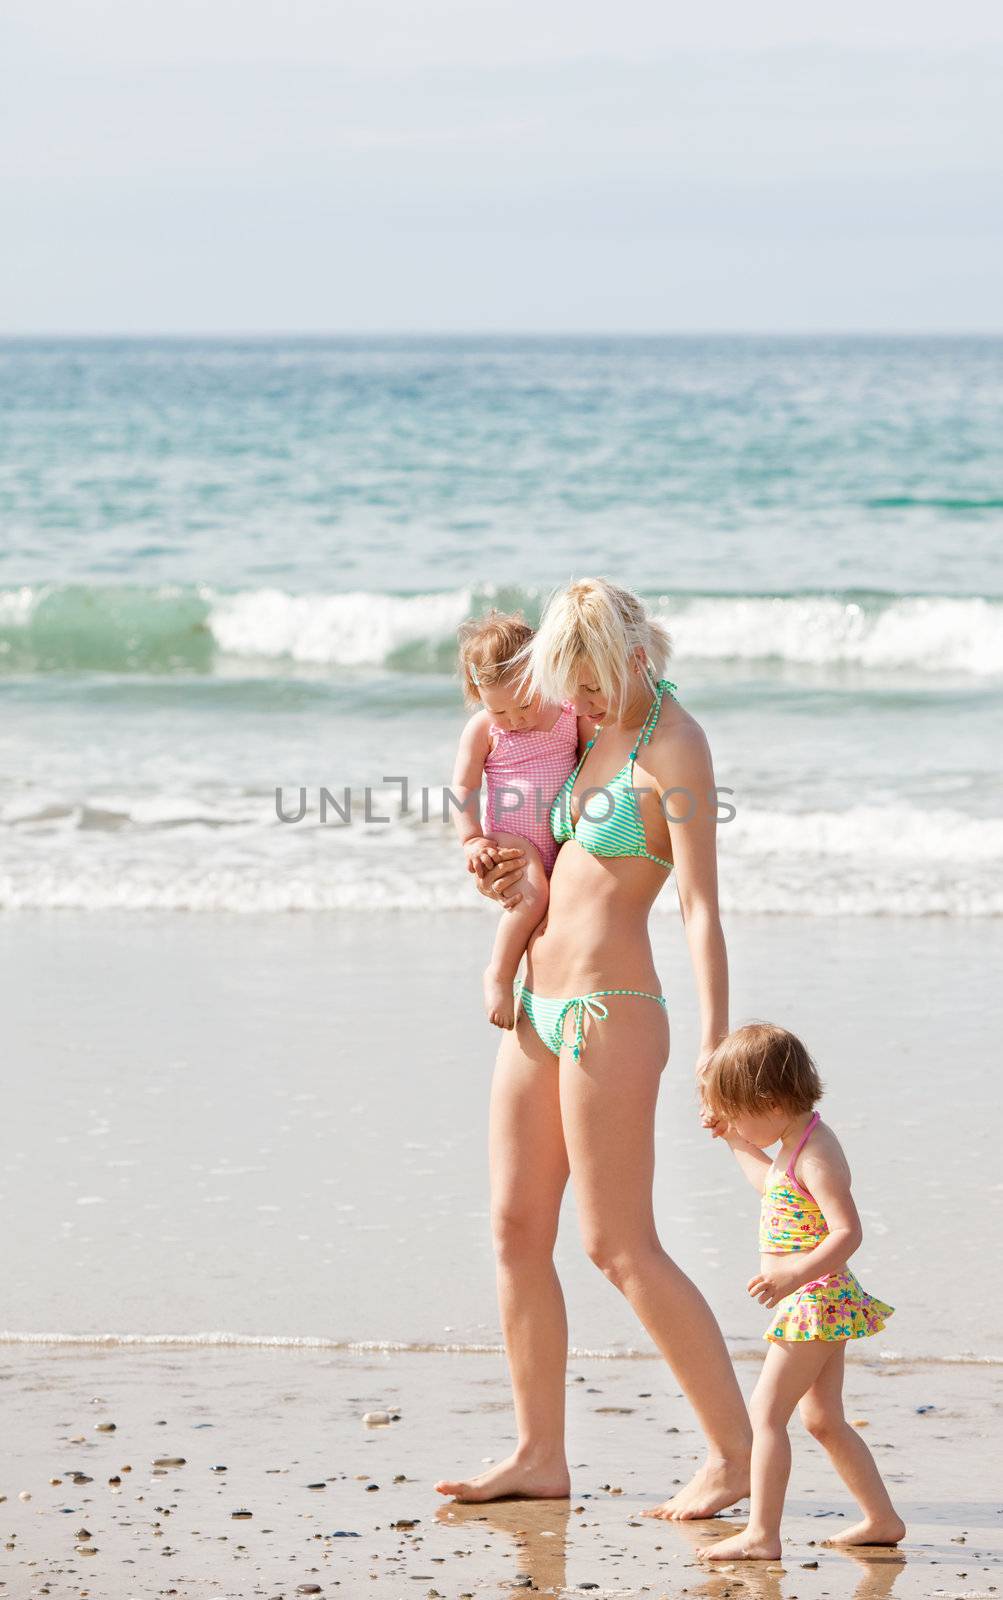 A young mother walking at the beach with her two children on her arm and at her hand